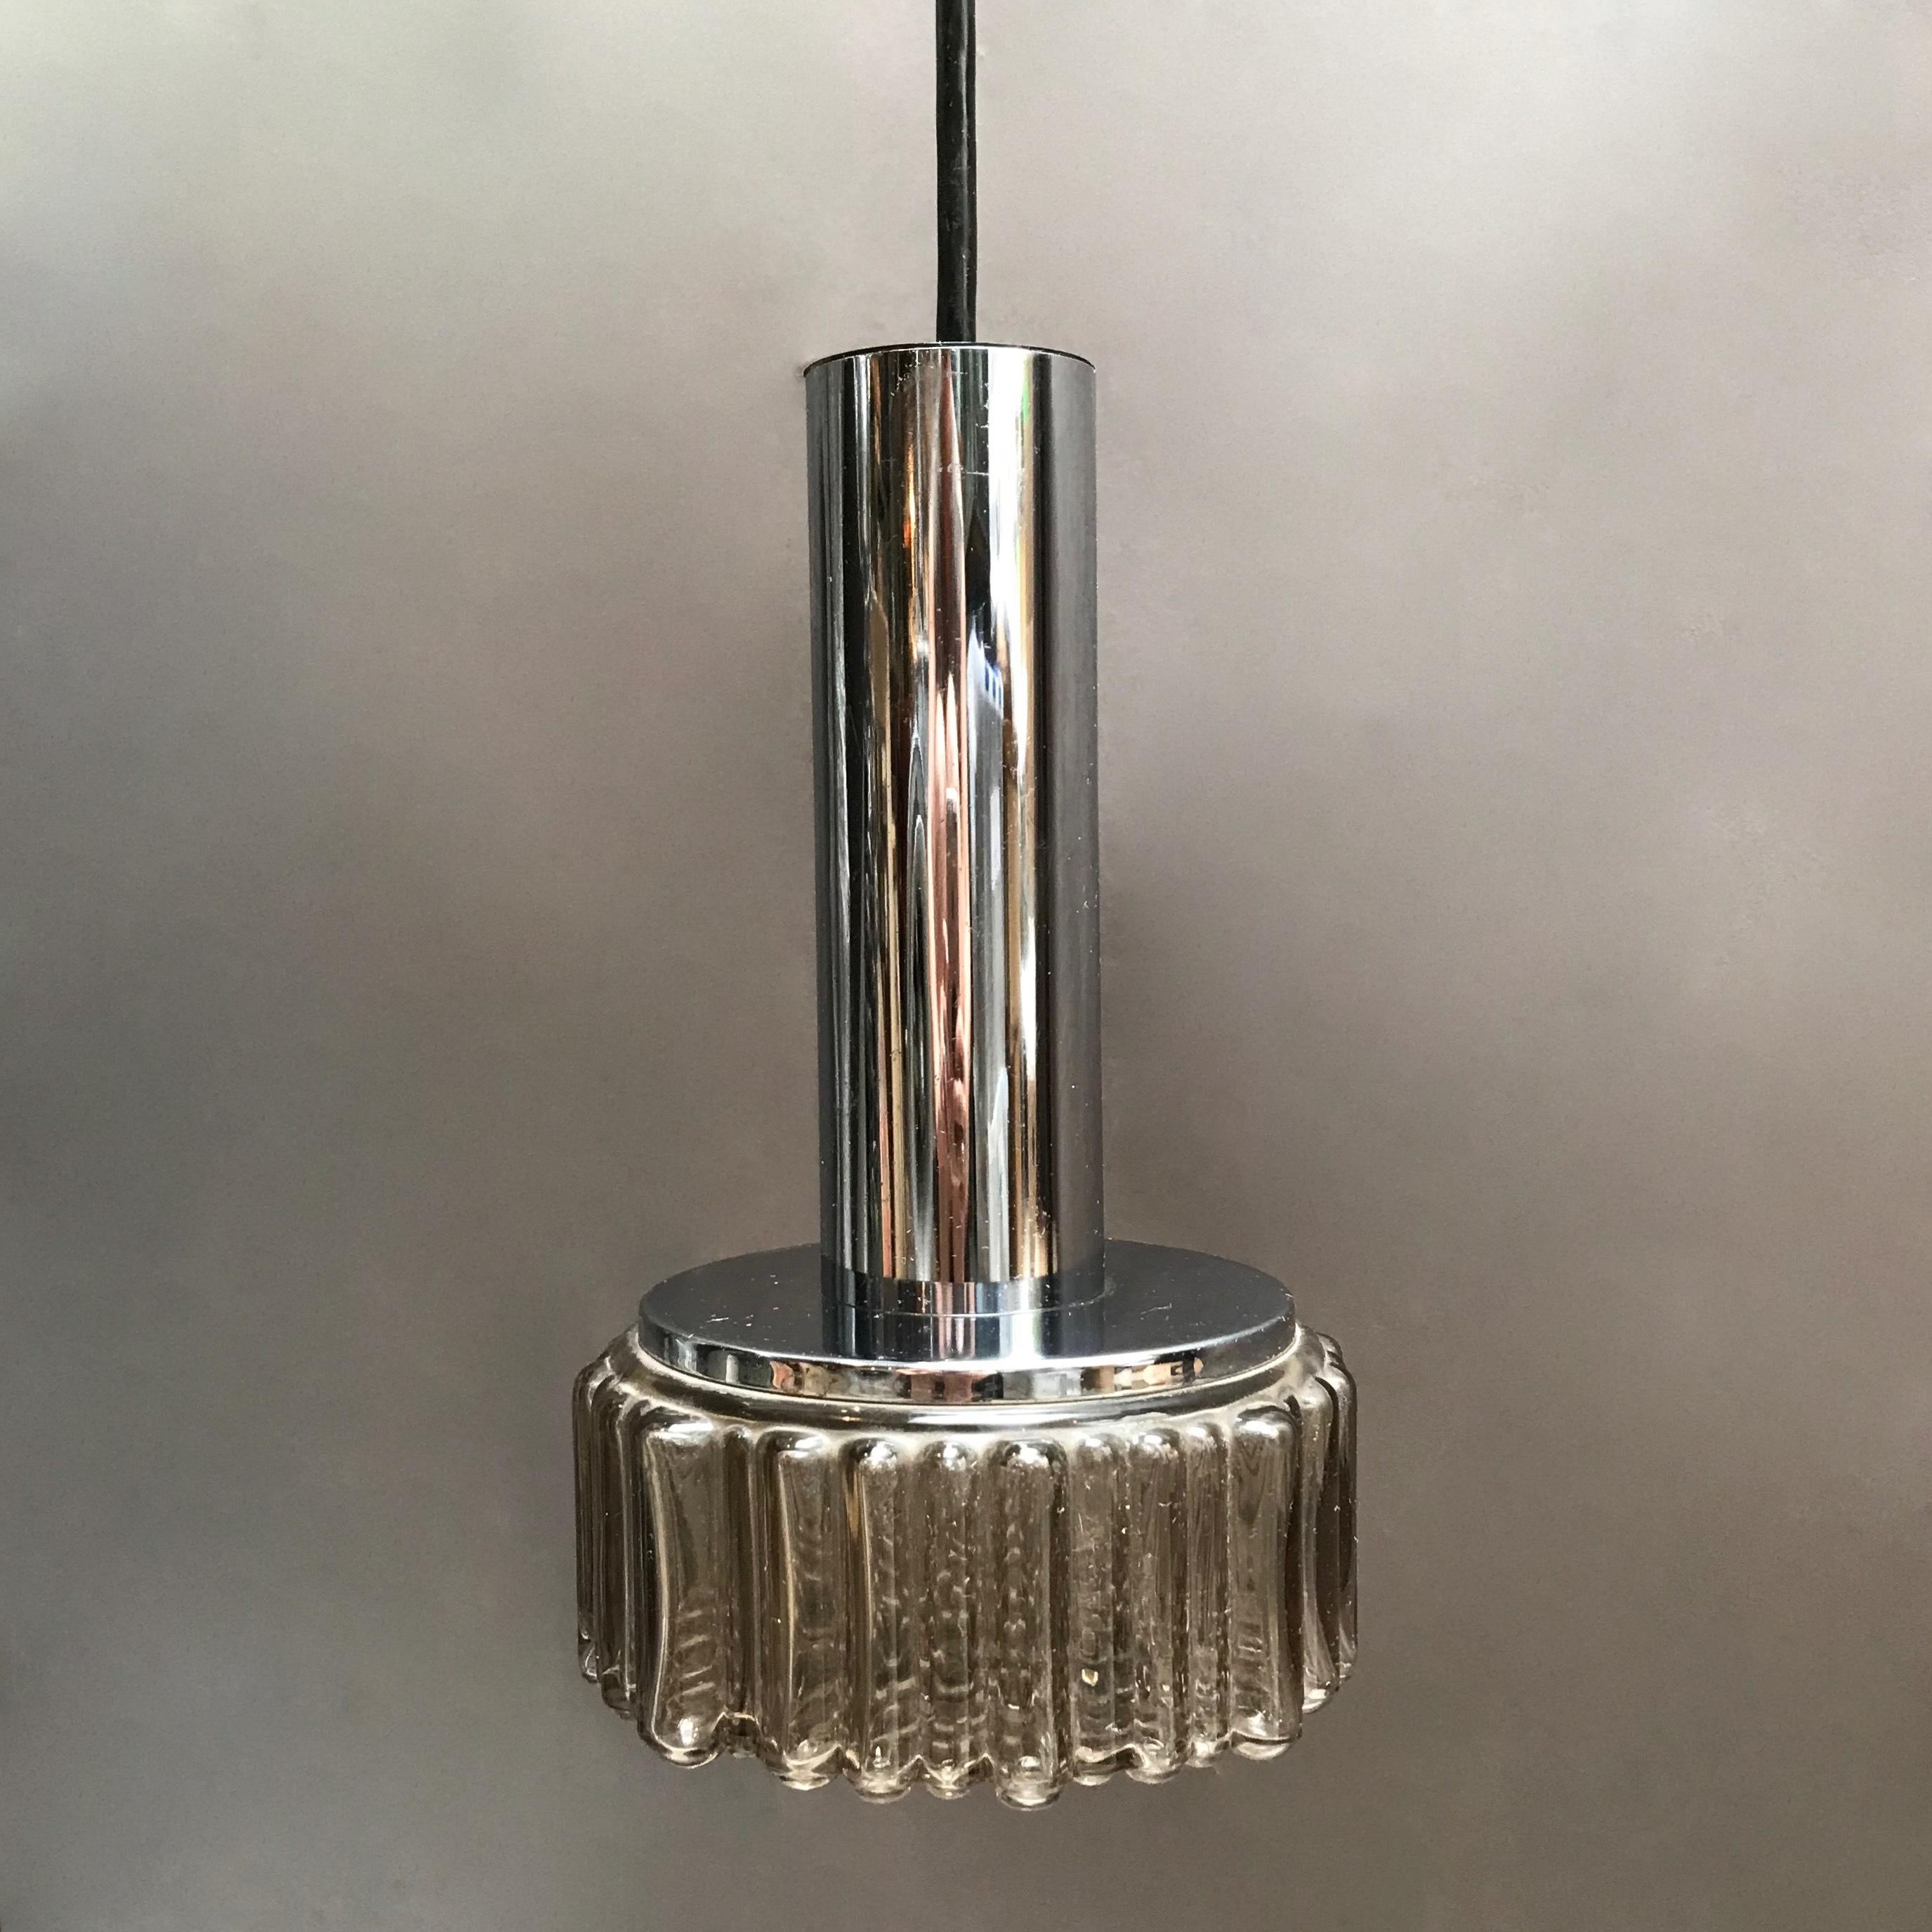 Modernist pendant light features a chrome cylinder with pebbled, smoked glass shade that measures 30 inches total height. With black cord and canopy.